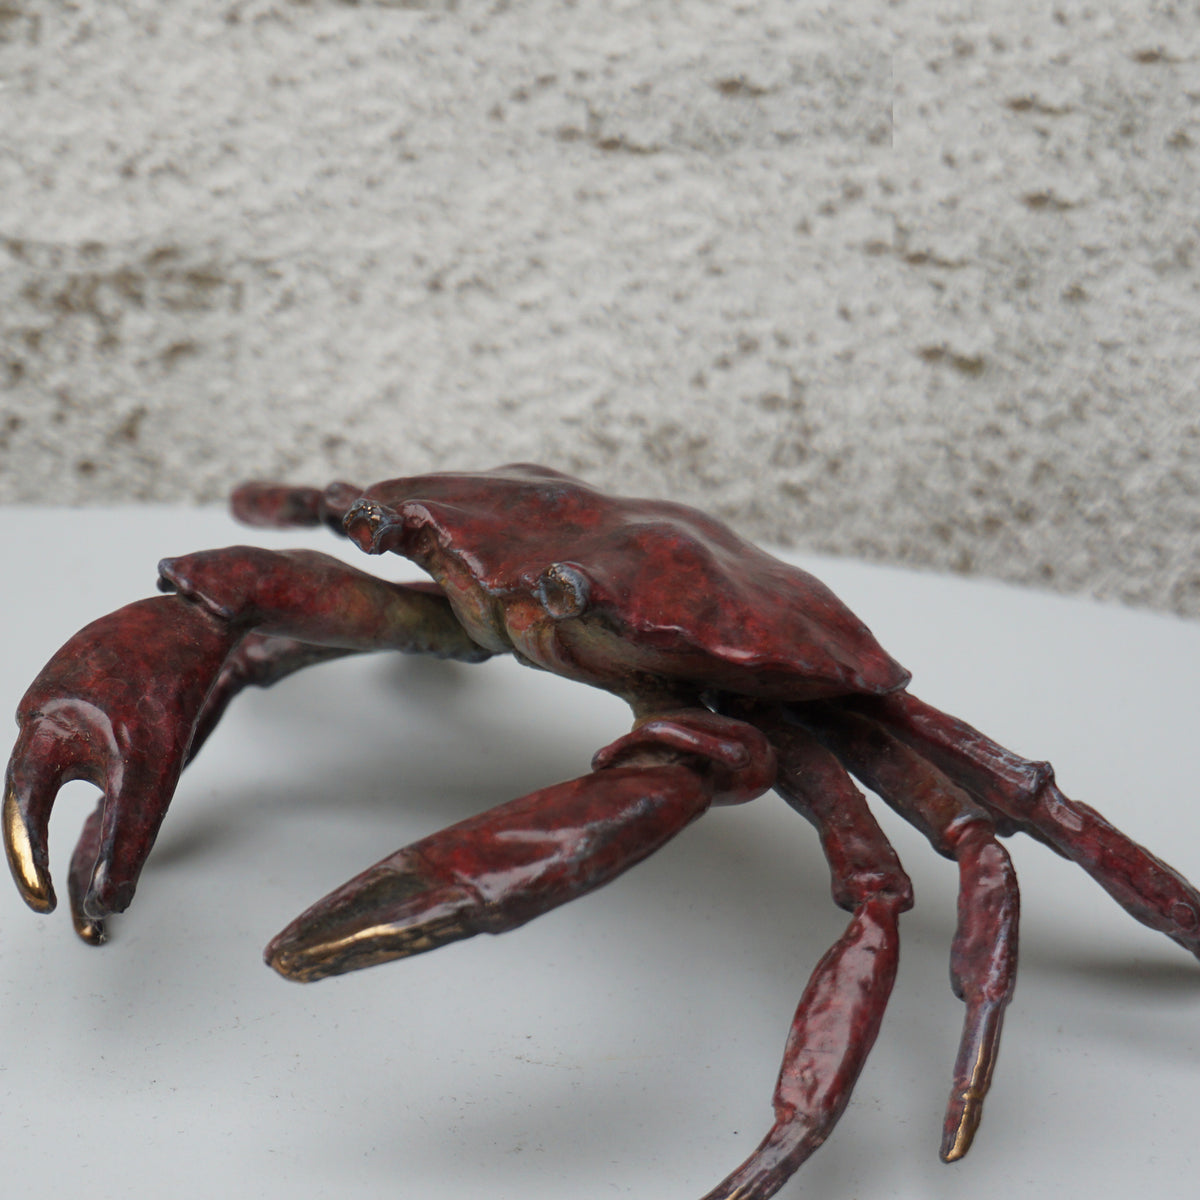 Large Crab - Limited Edition